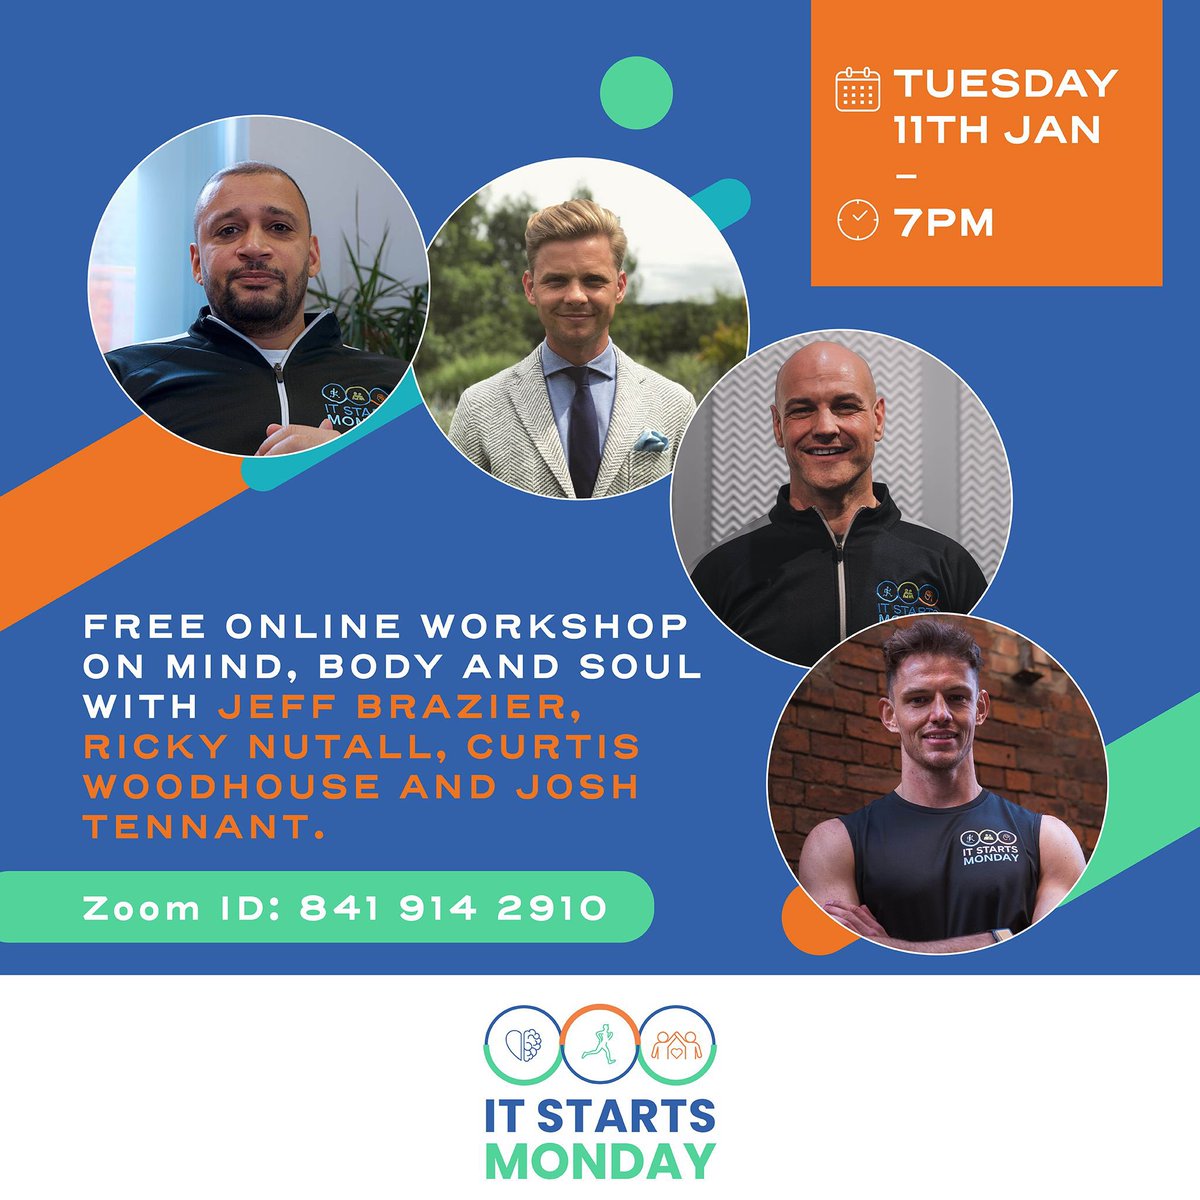 Really excited about this! Free to all to join. Our first Mind, body and soul online workshop with @JeffBrazier @JustRick999 @Josh10ant @curtiswoodhous8 A light workout followed by a talk and Q&A. Perfect for those wanting to find out more about us.